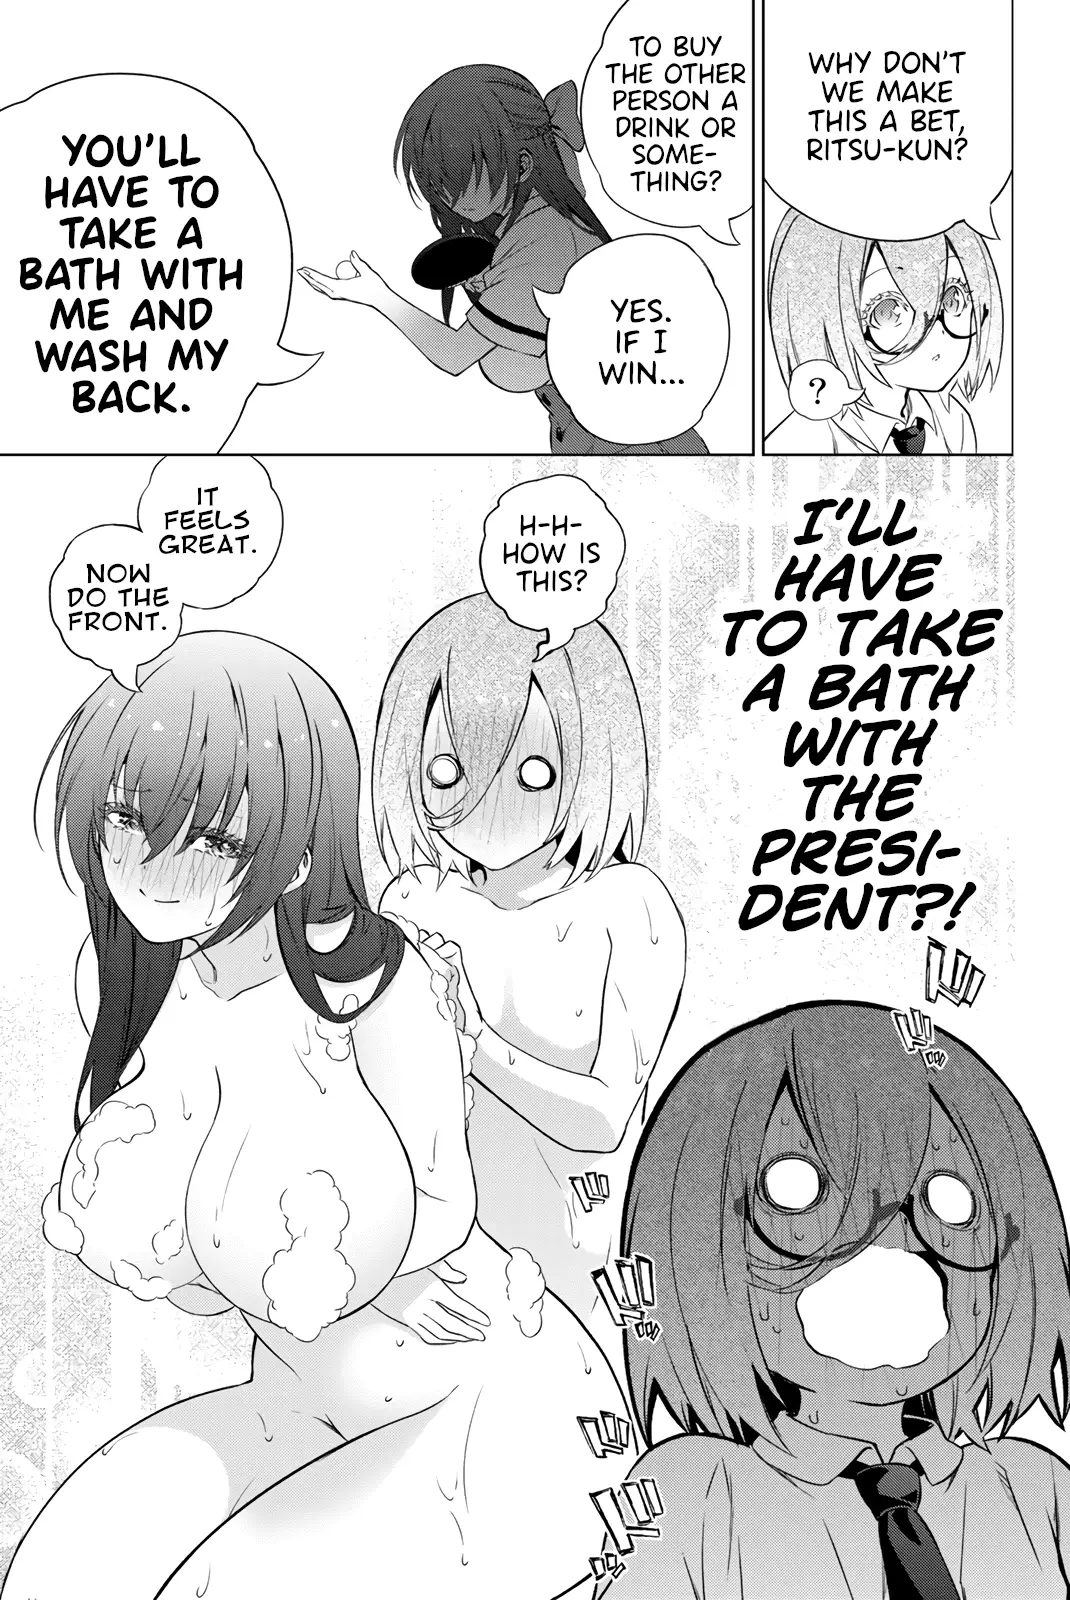 My Senpai Is After My Life - 35 page 3-13a40e21